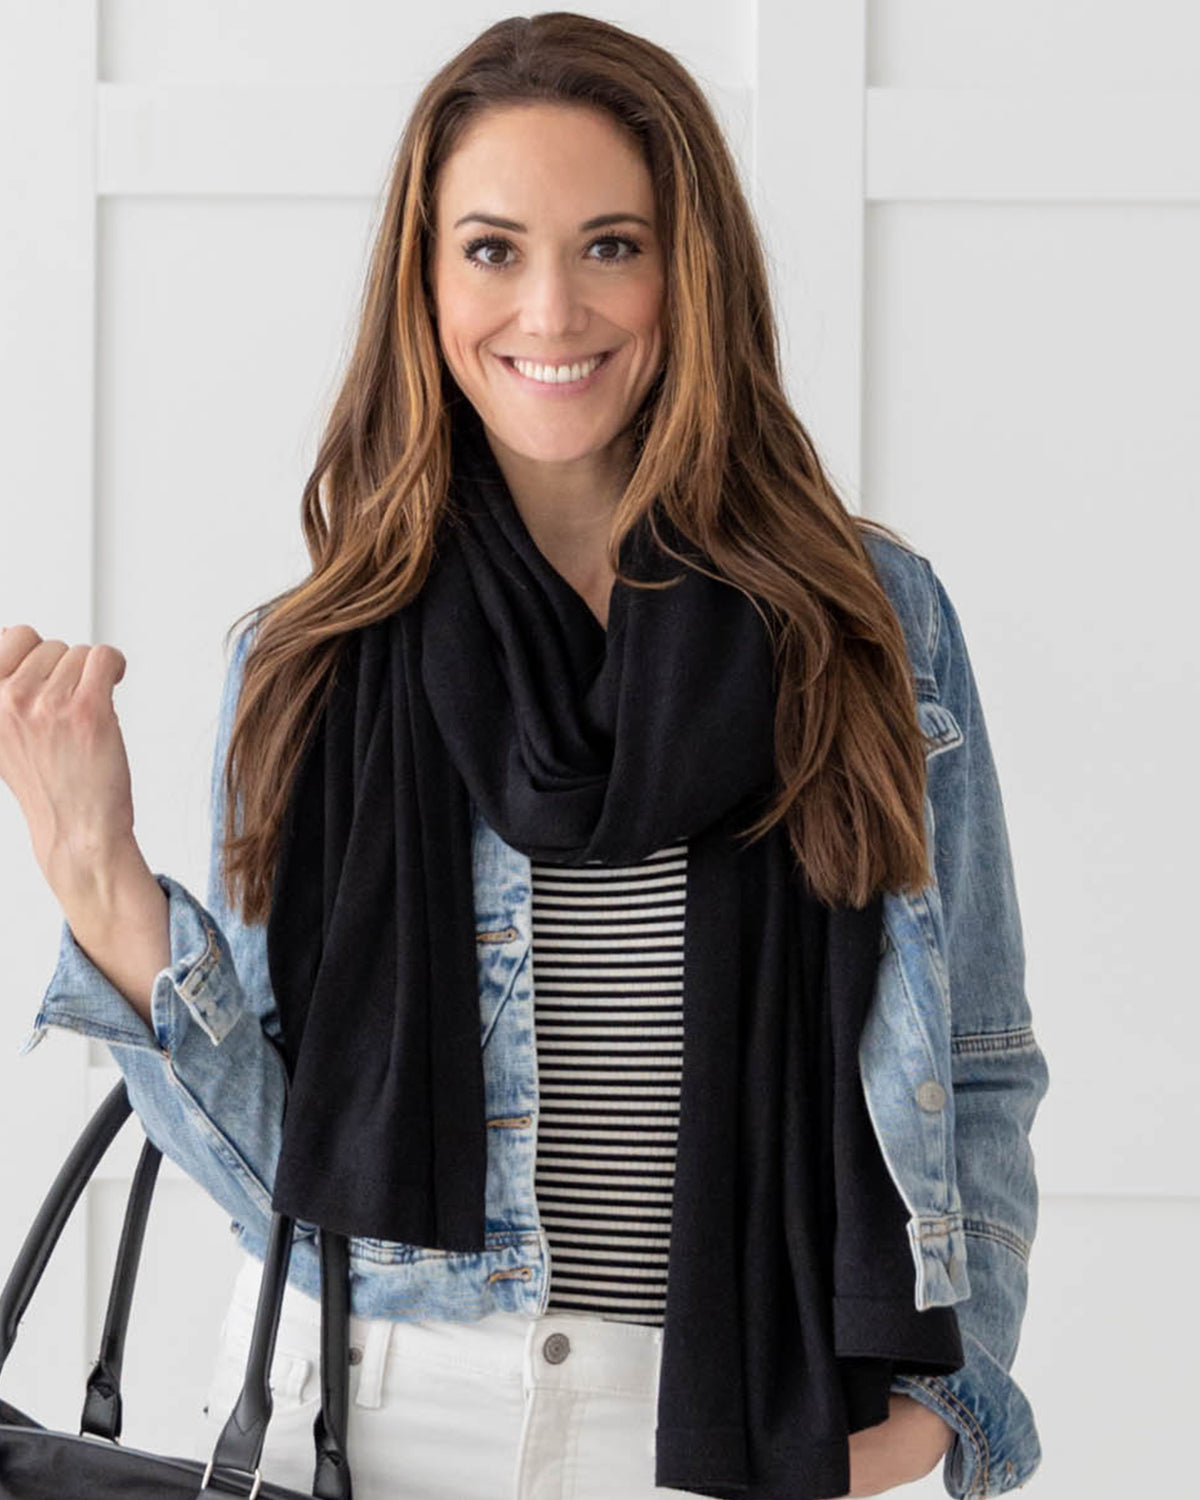 Woman wearing the Dreamsoft Travel Scarf in Black, holding a bag and smiling